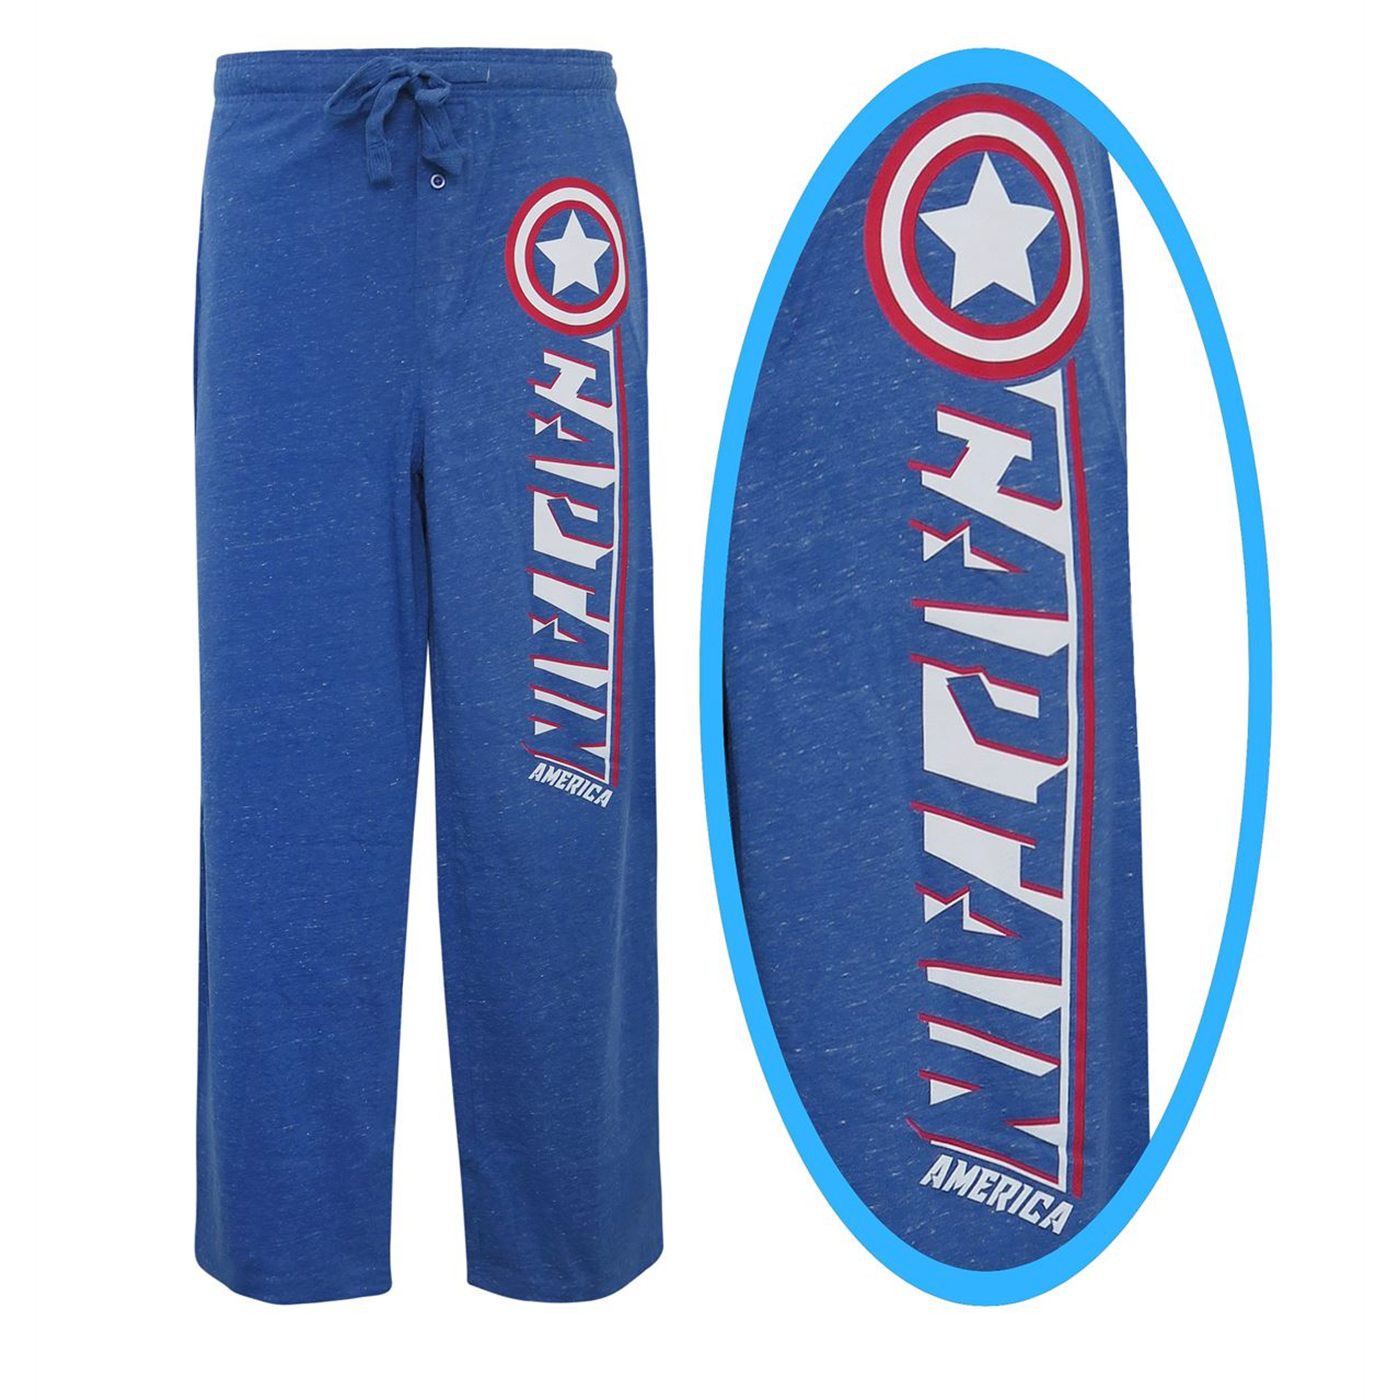 Captain America The Avengers Pants - FREE SHIPPING